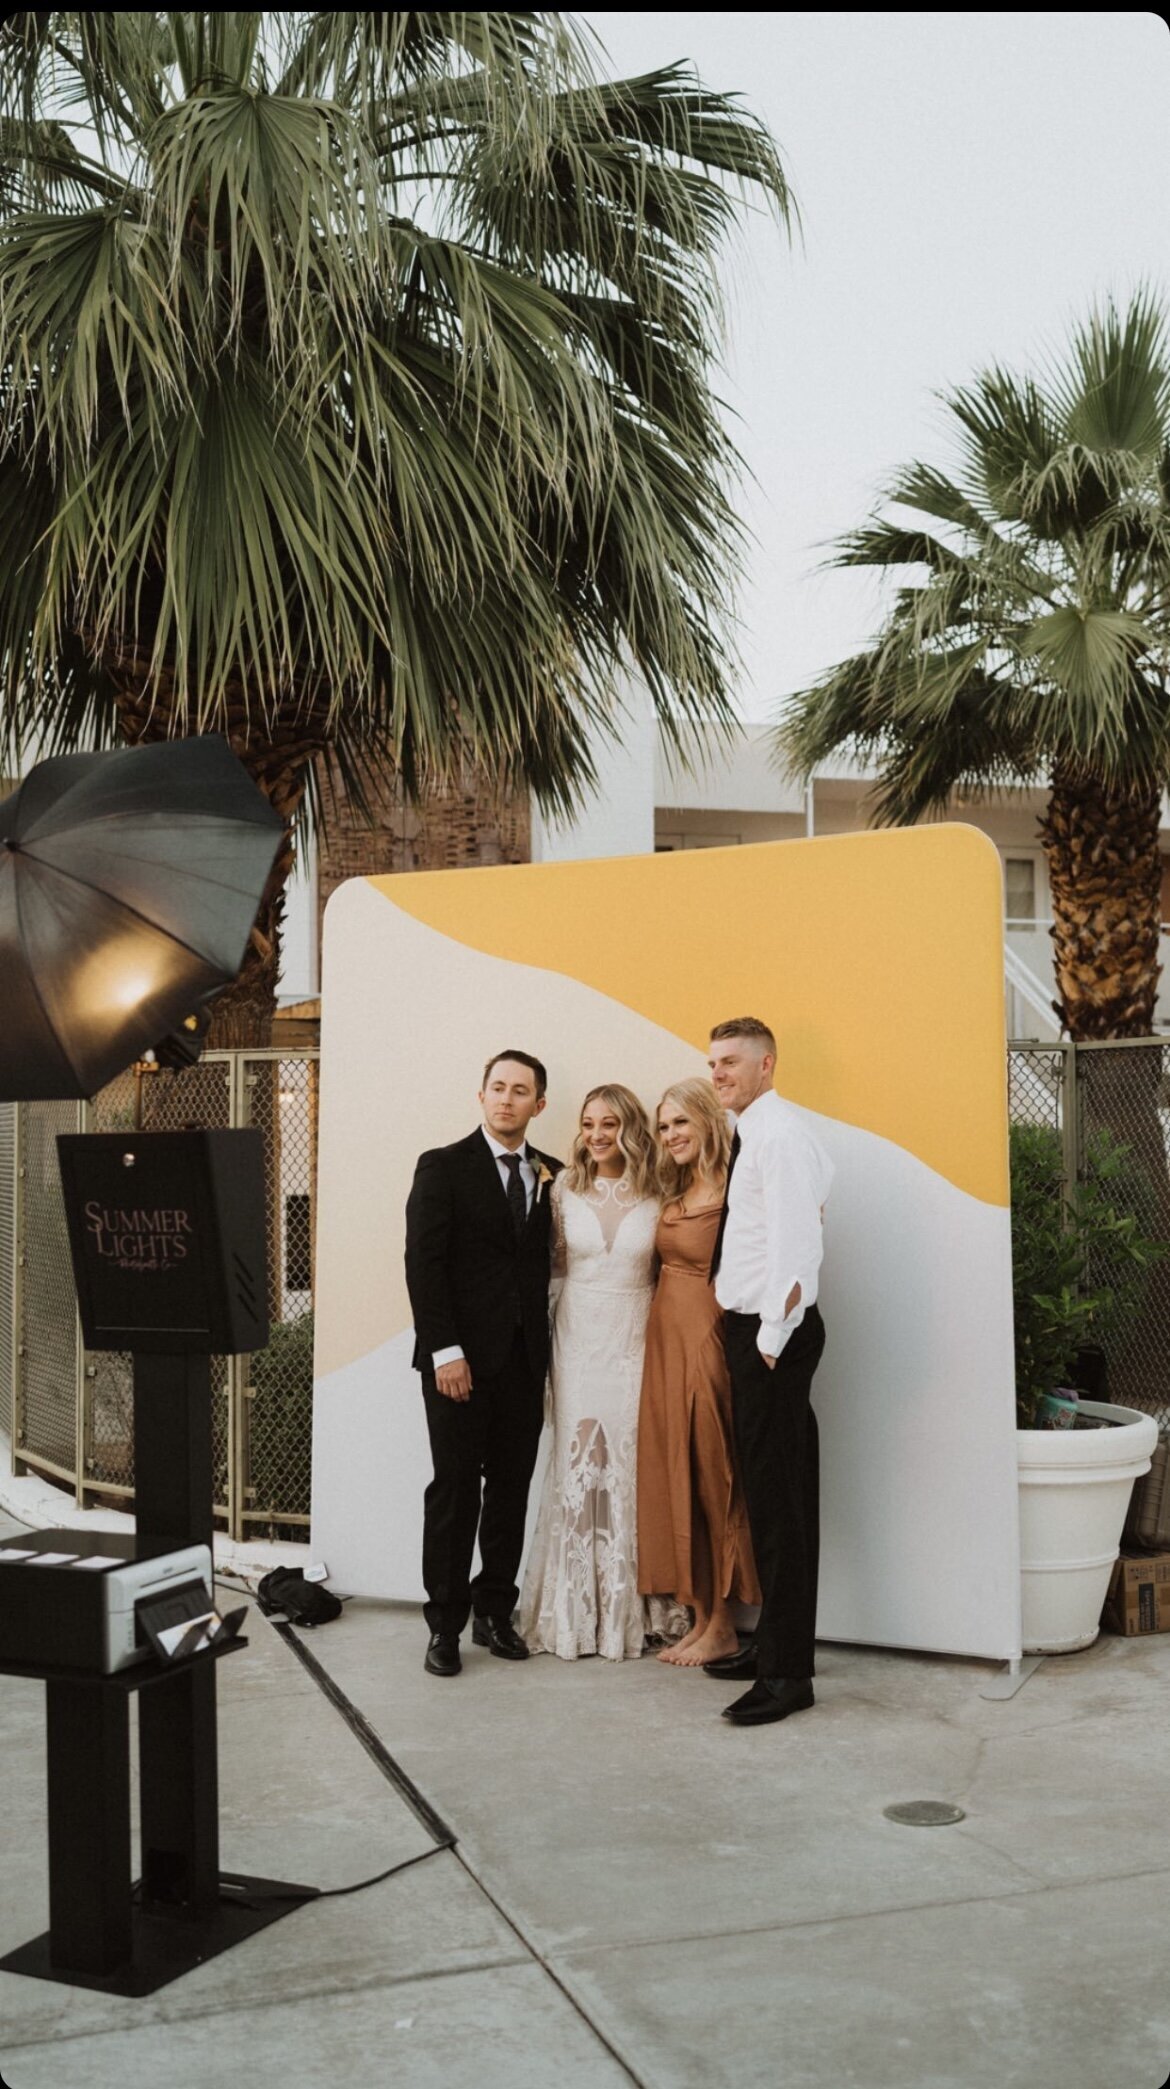 Ace Hotel wedding photo booth